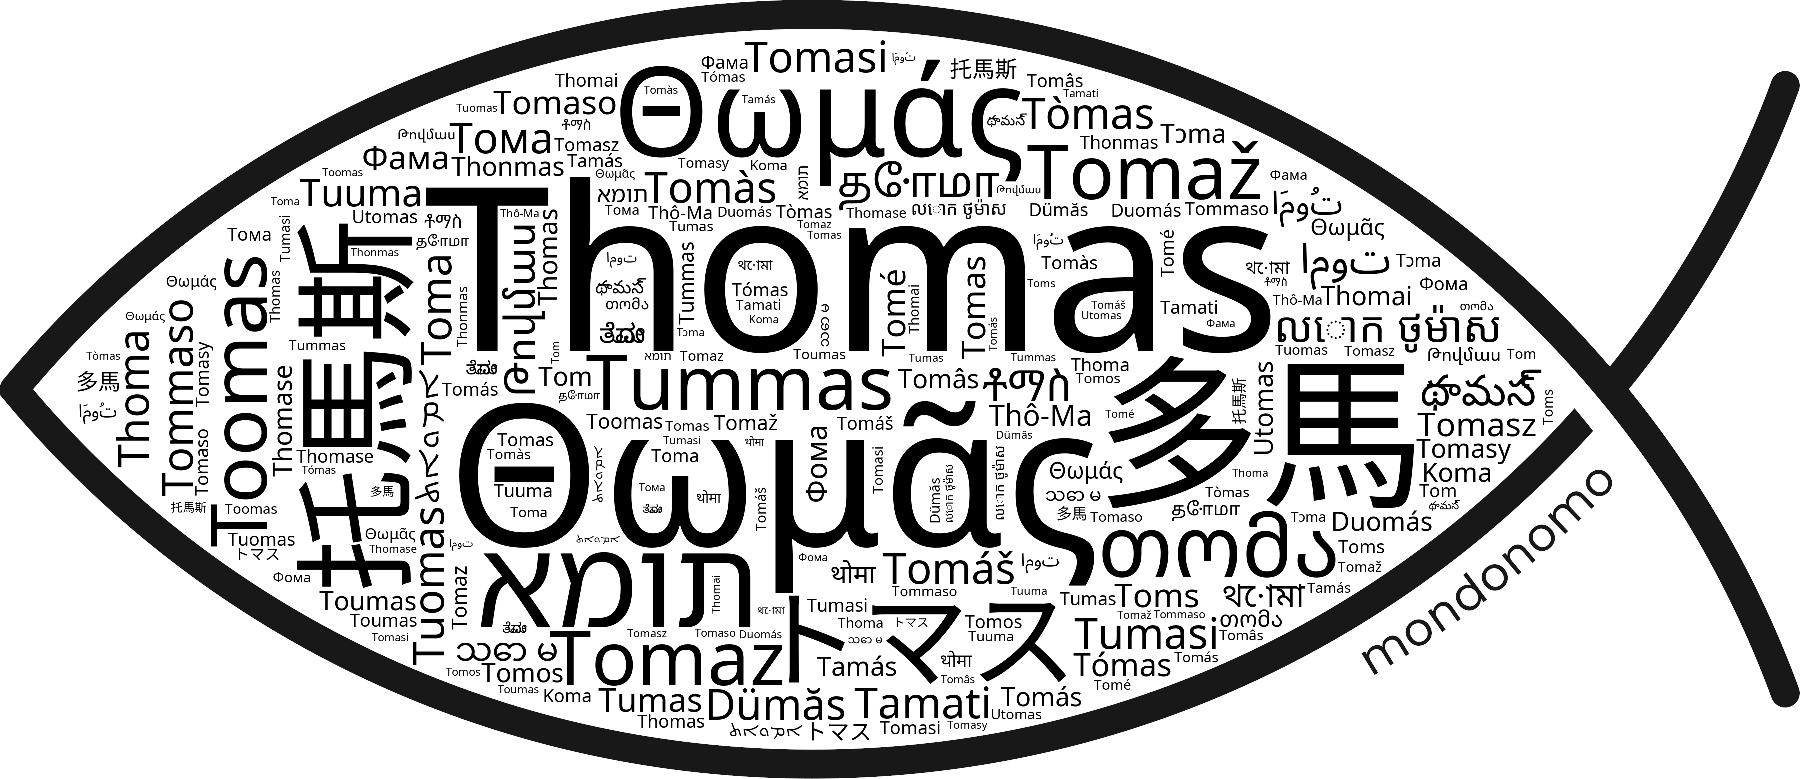 Name Thomas in the world's Bibles